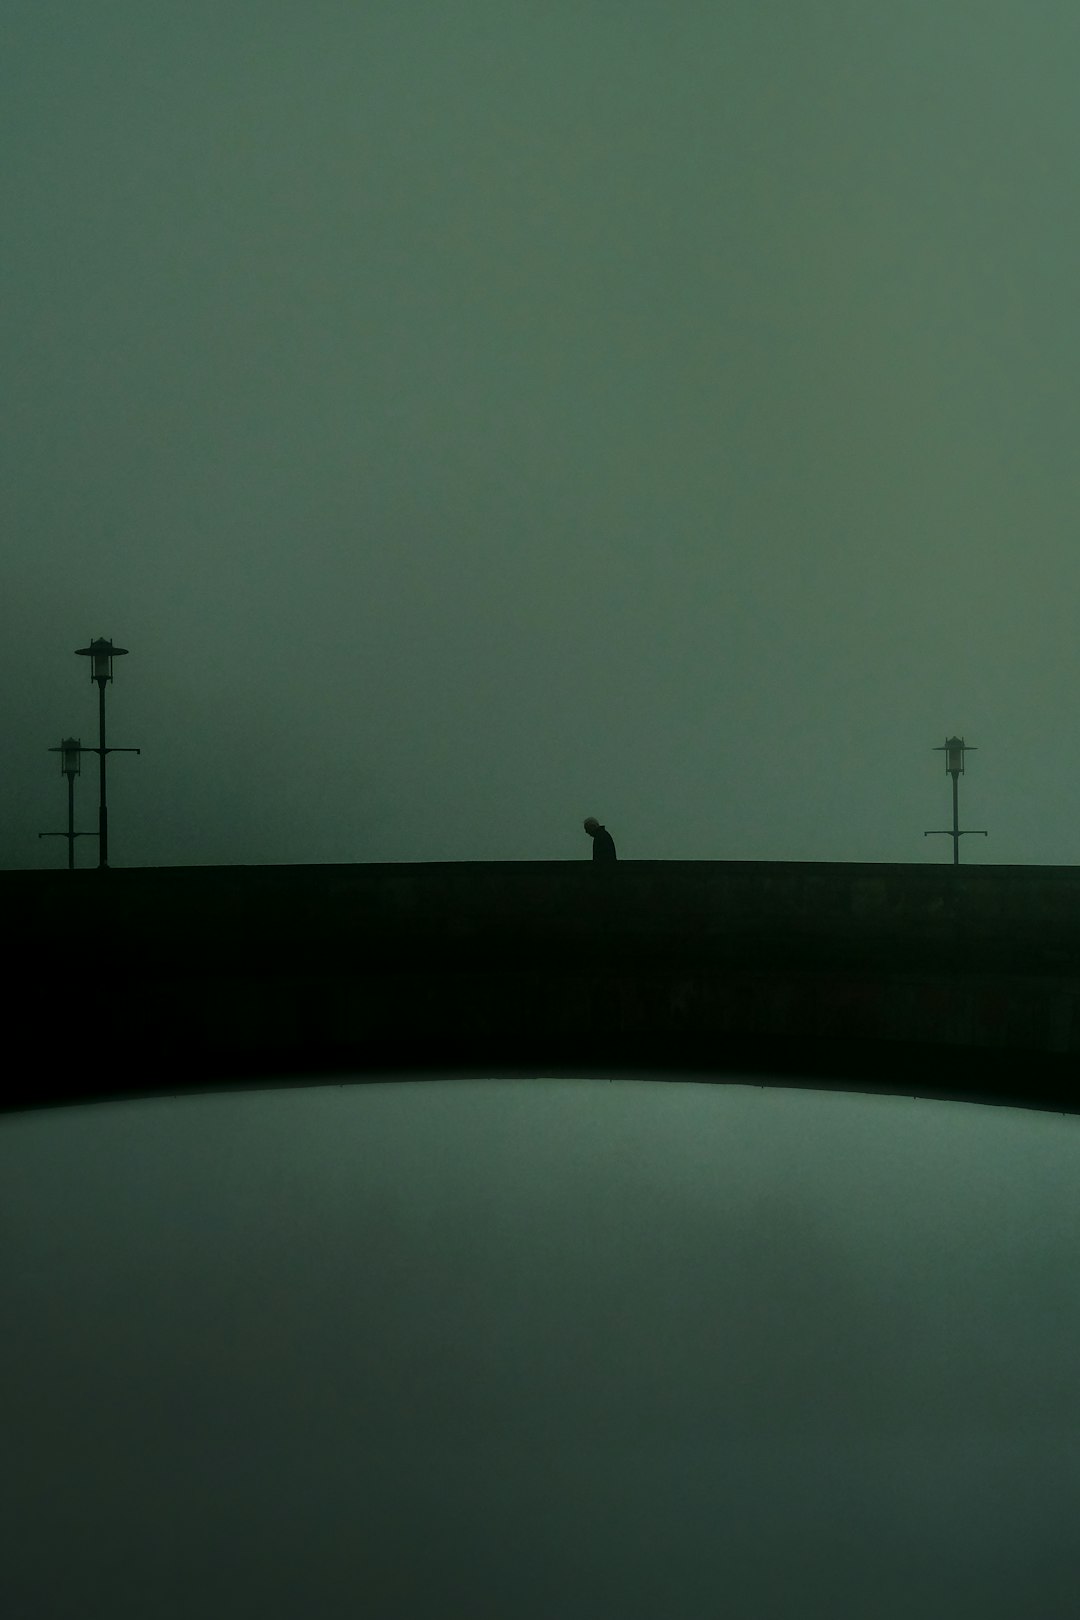 silhouette of person standing on bridge